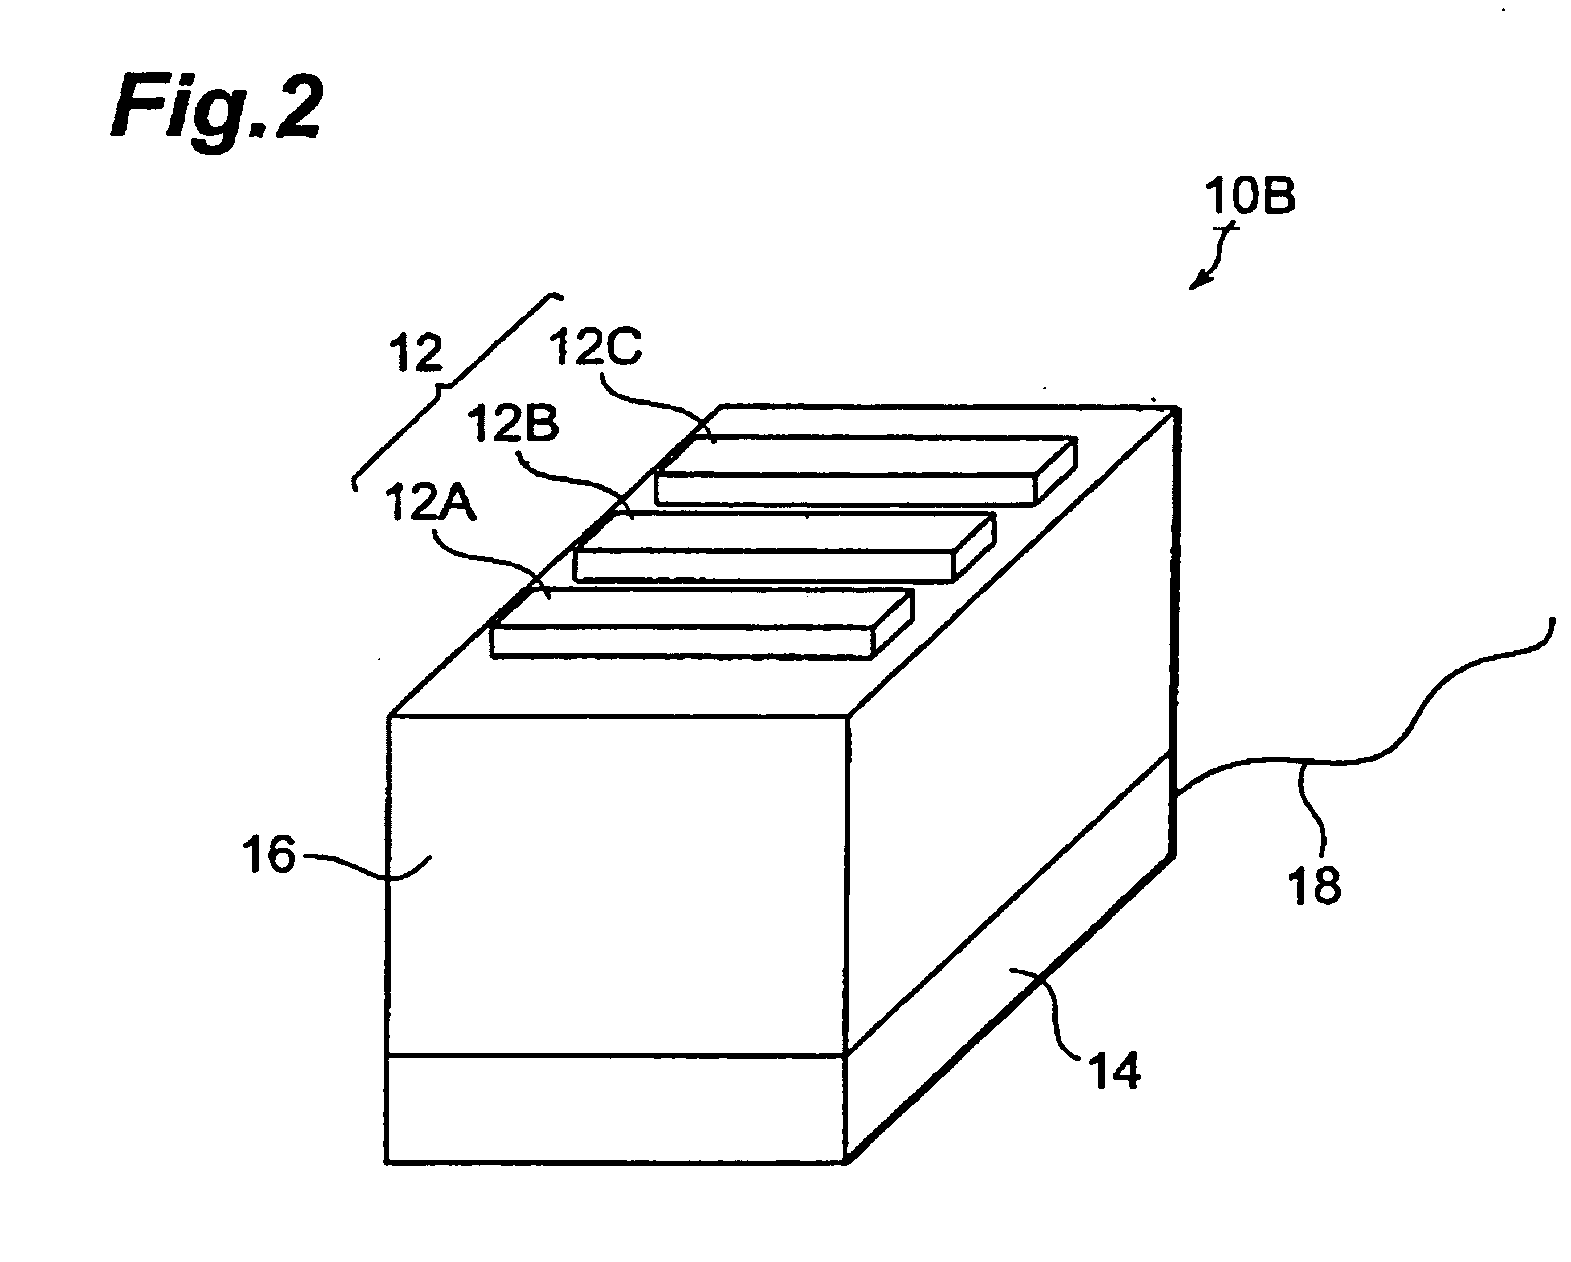 Electrode device